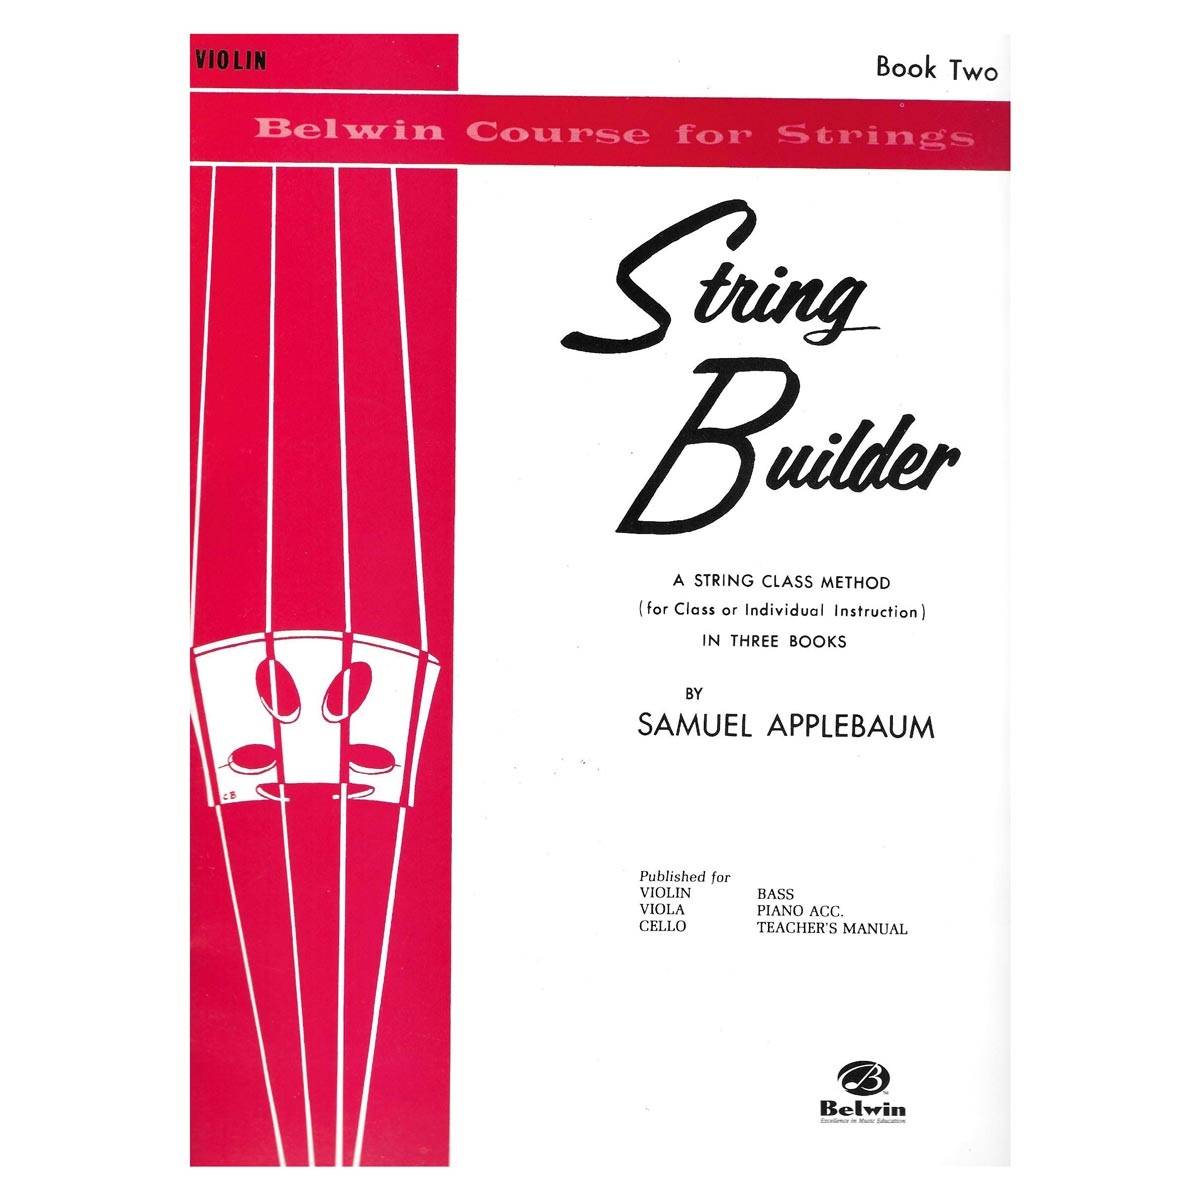 Belwin Course For Strings - String Builder - Book Two